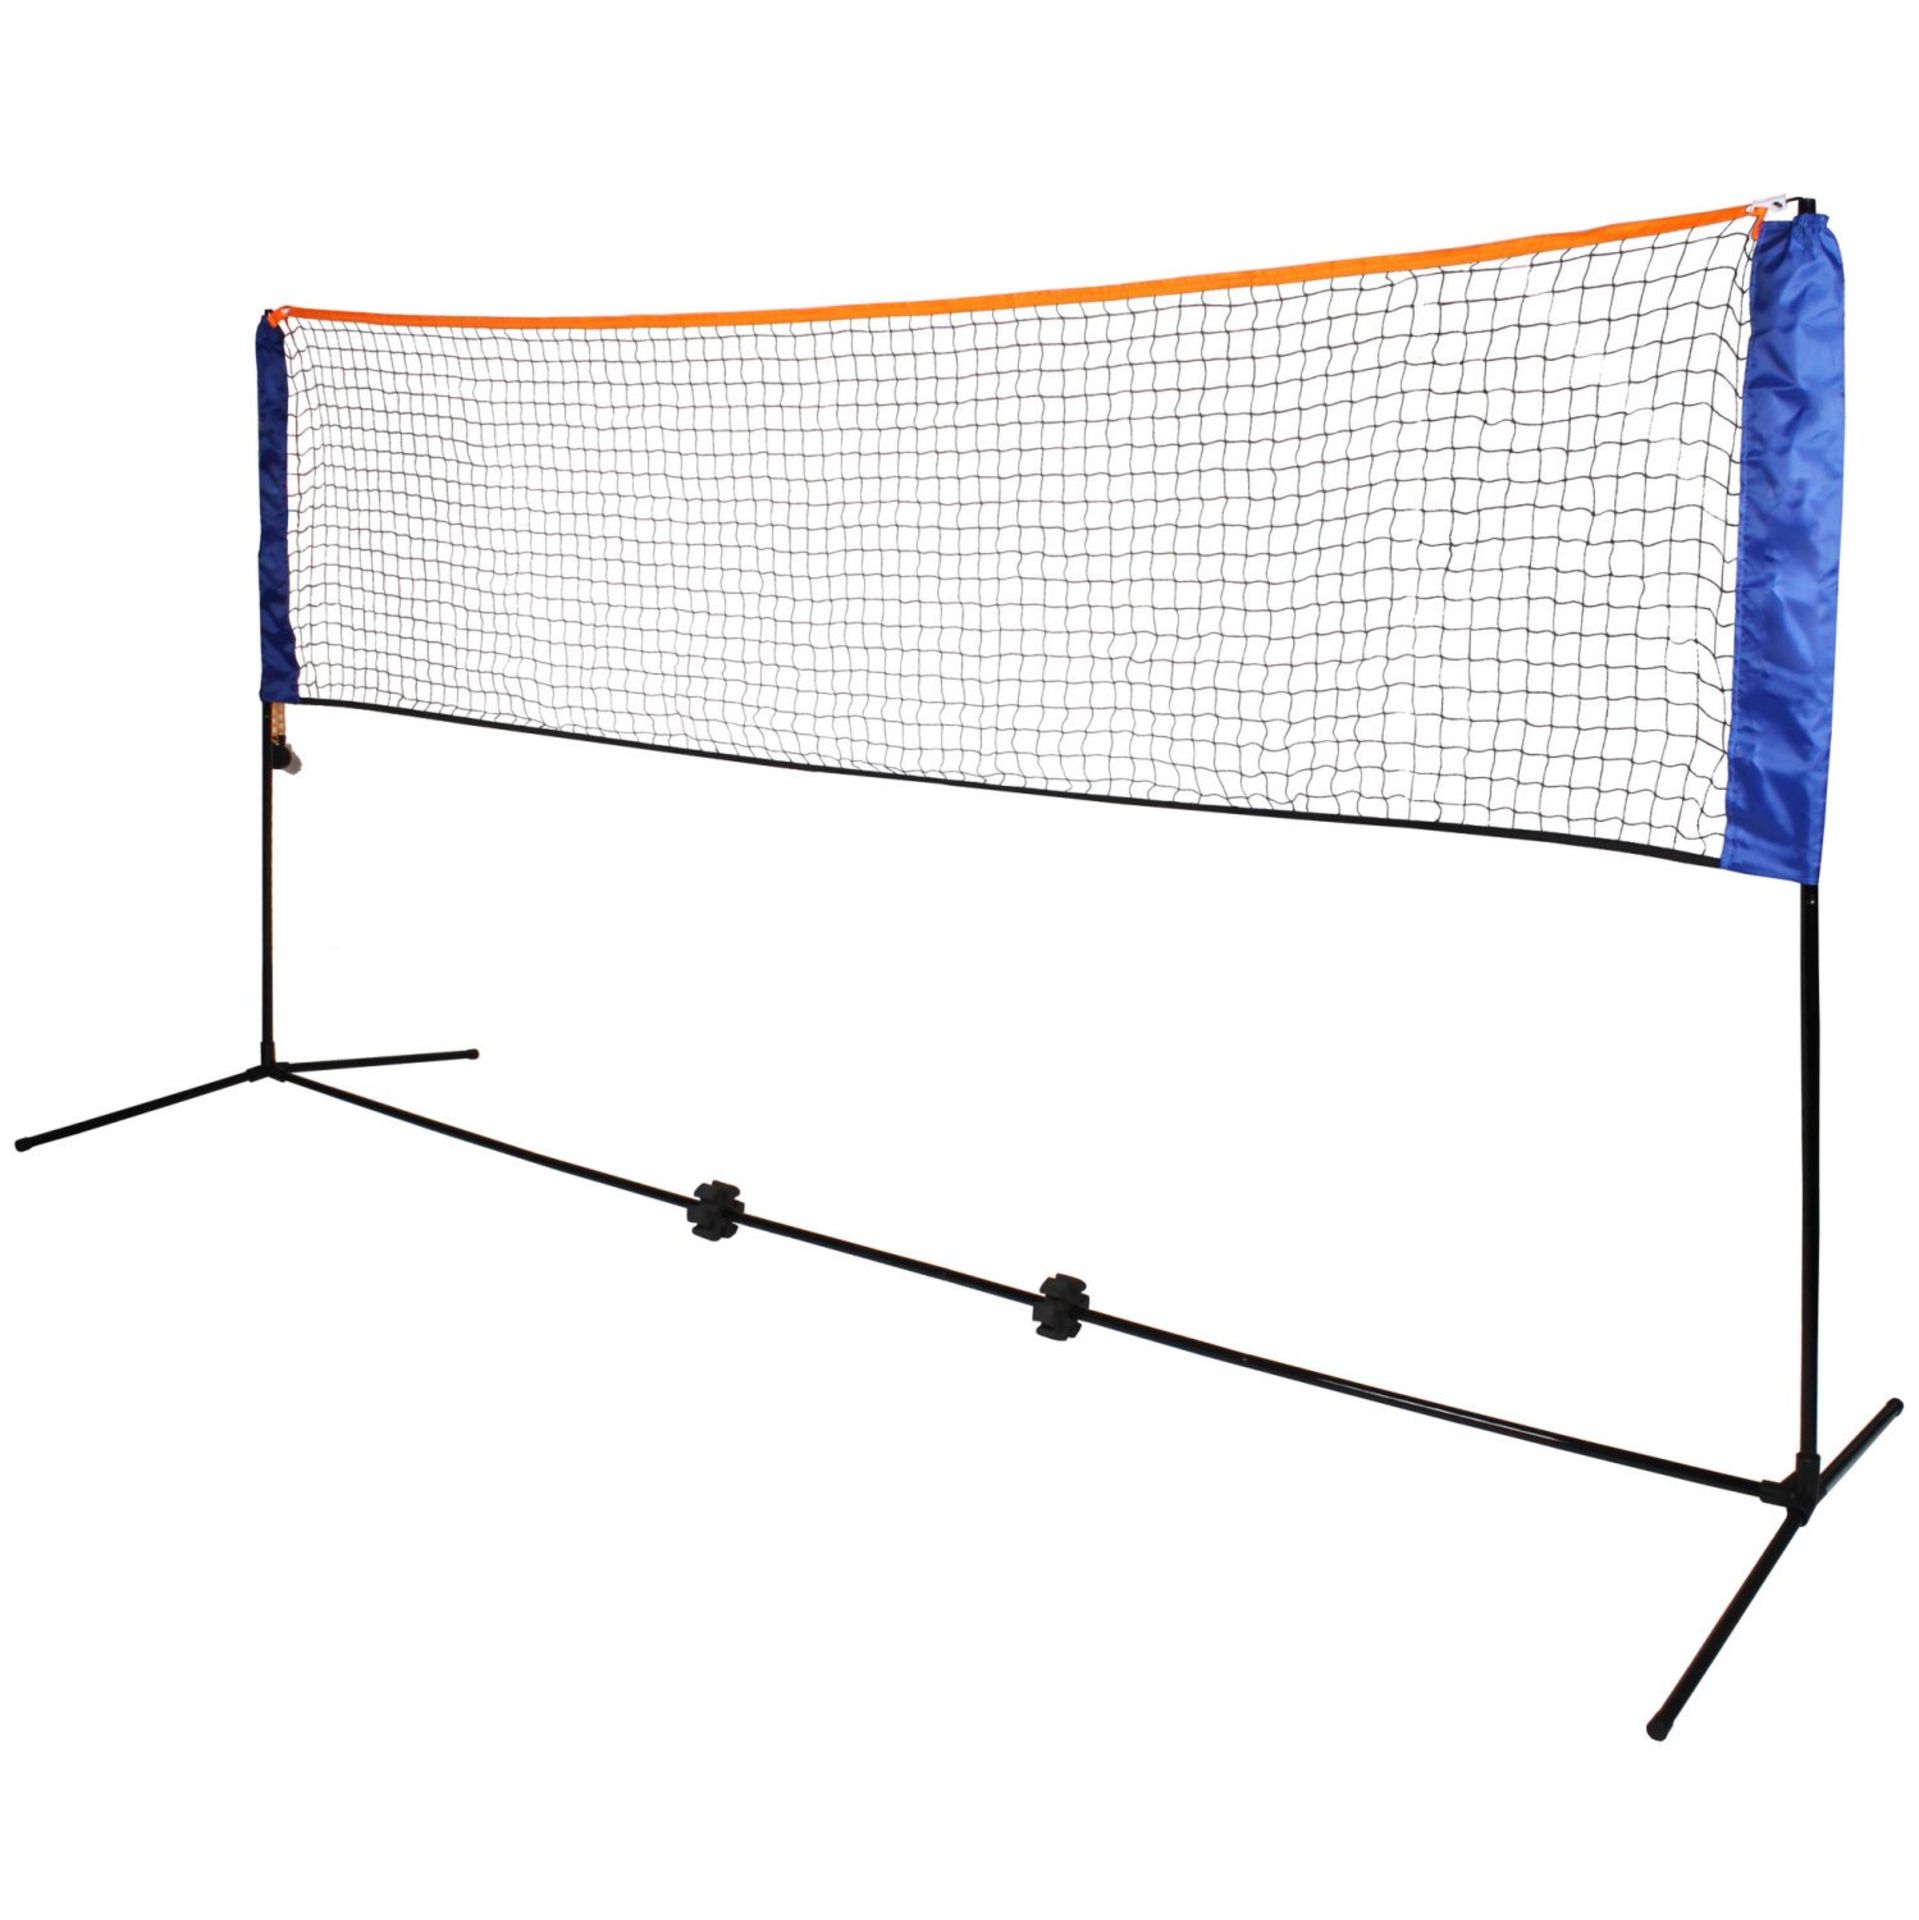 (SK32) Large Multi-Purpose fully adjustable net set. The posts are able to reach 155cm for badm...